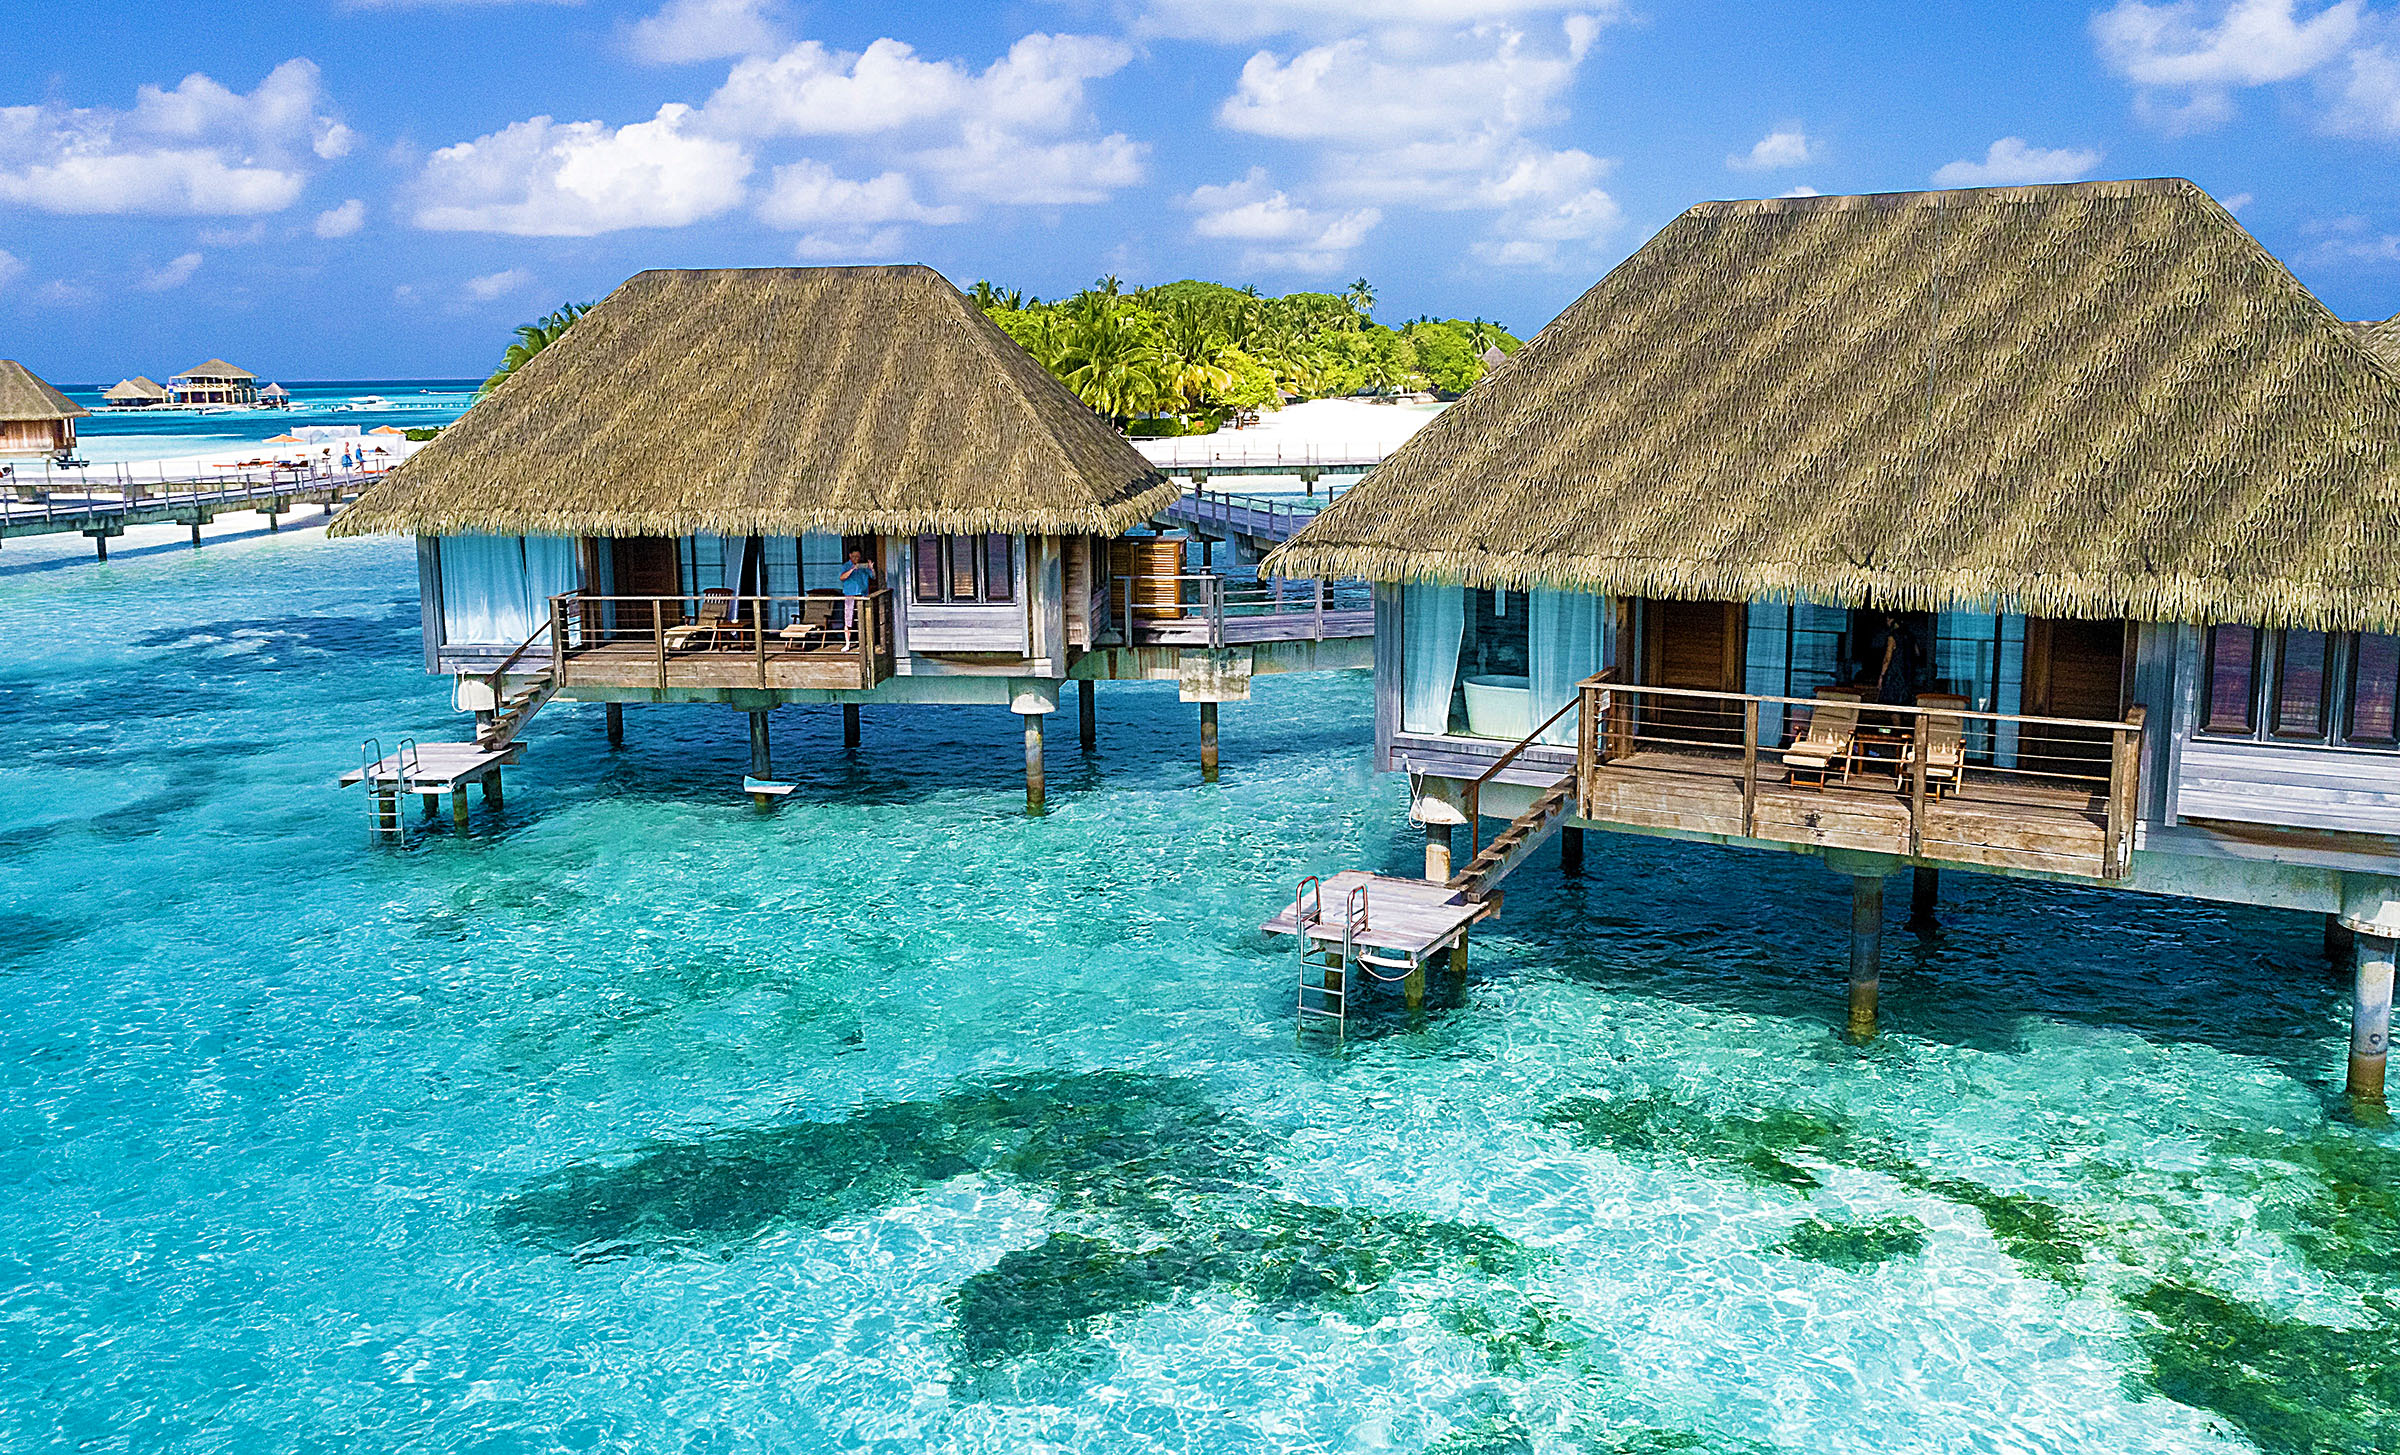 Maldives Overwater Bungalows MileagePlus Award Redemption • Point Me to ...